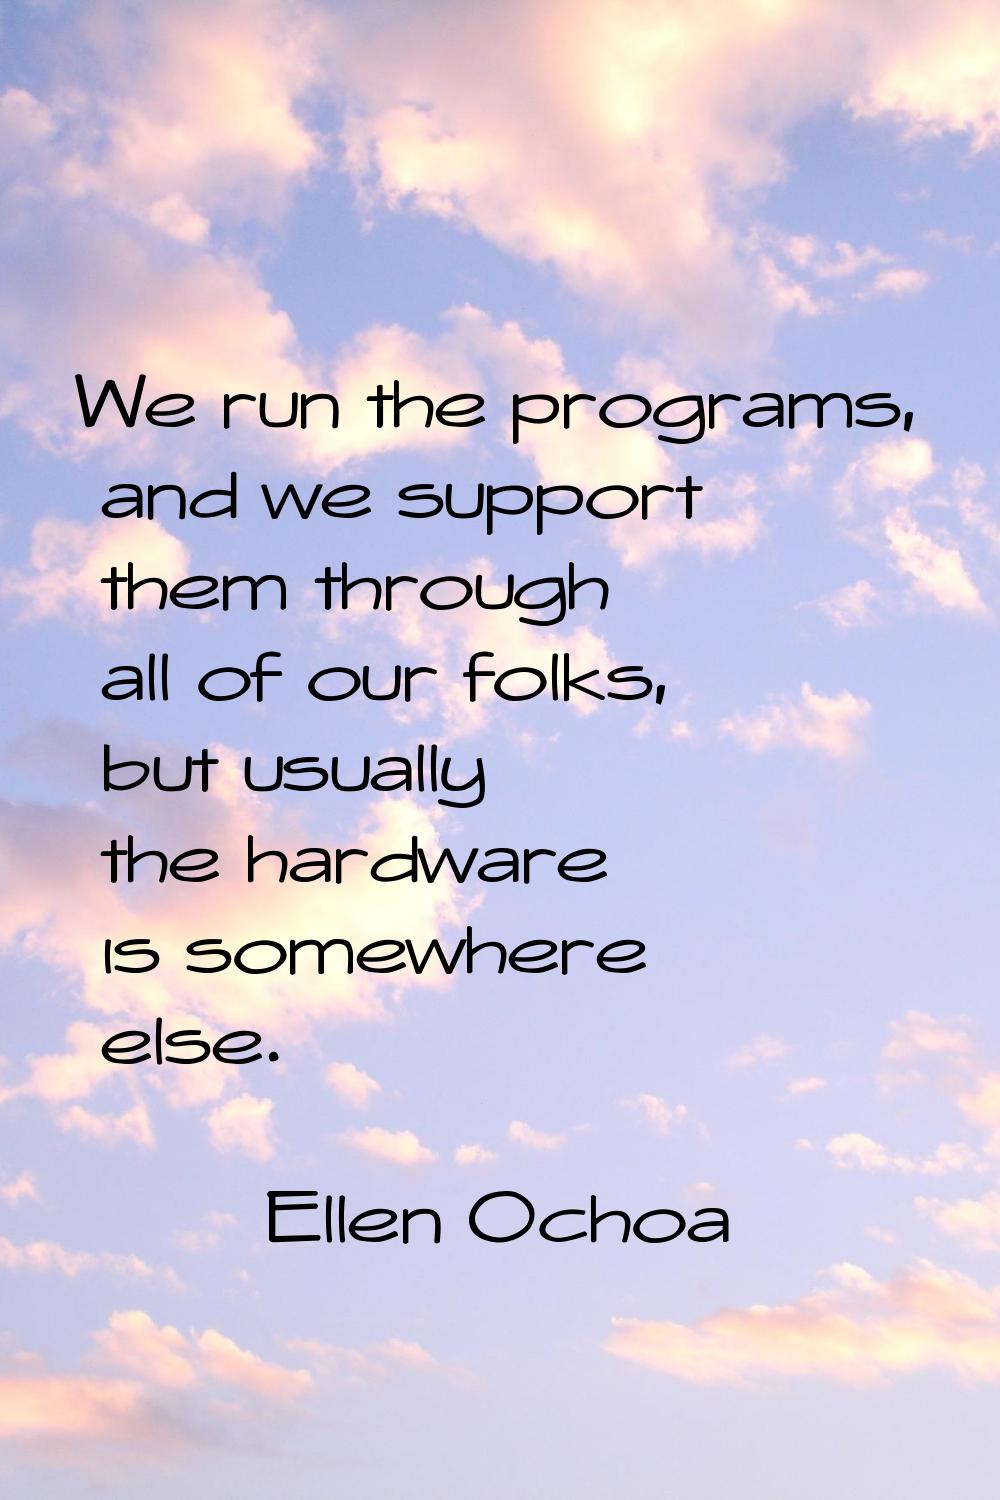 We run the programs, and we support them through all of our folks, but usually the hardware is some